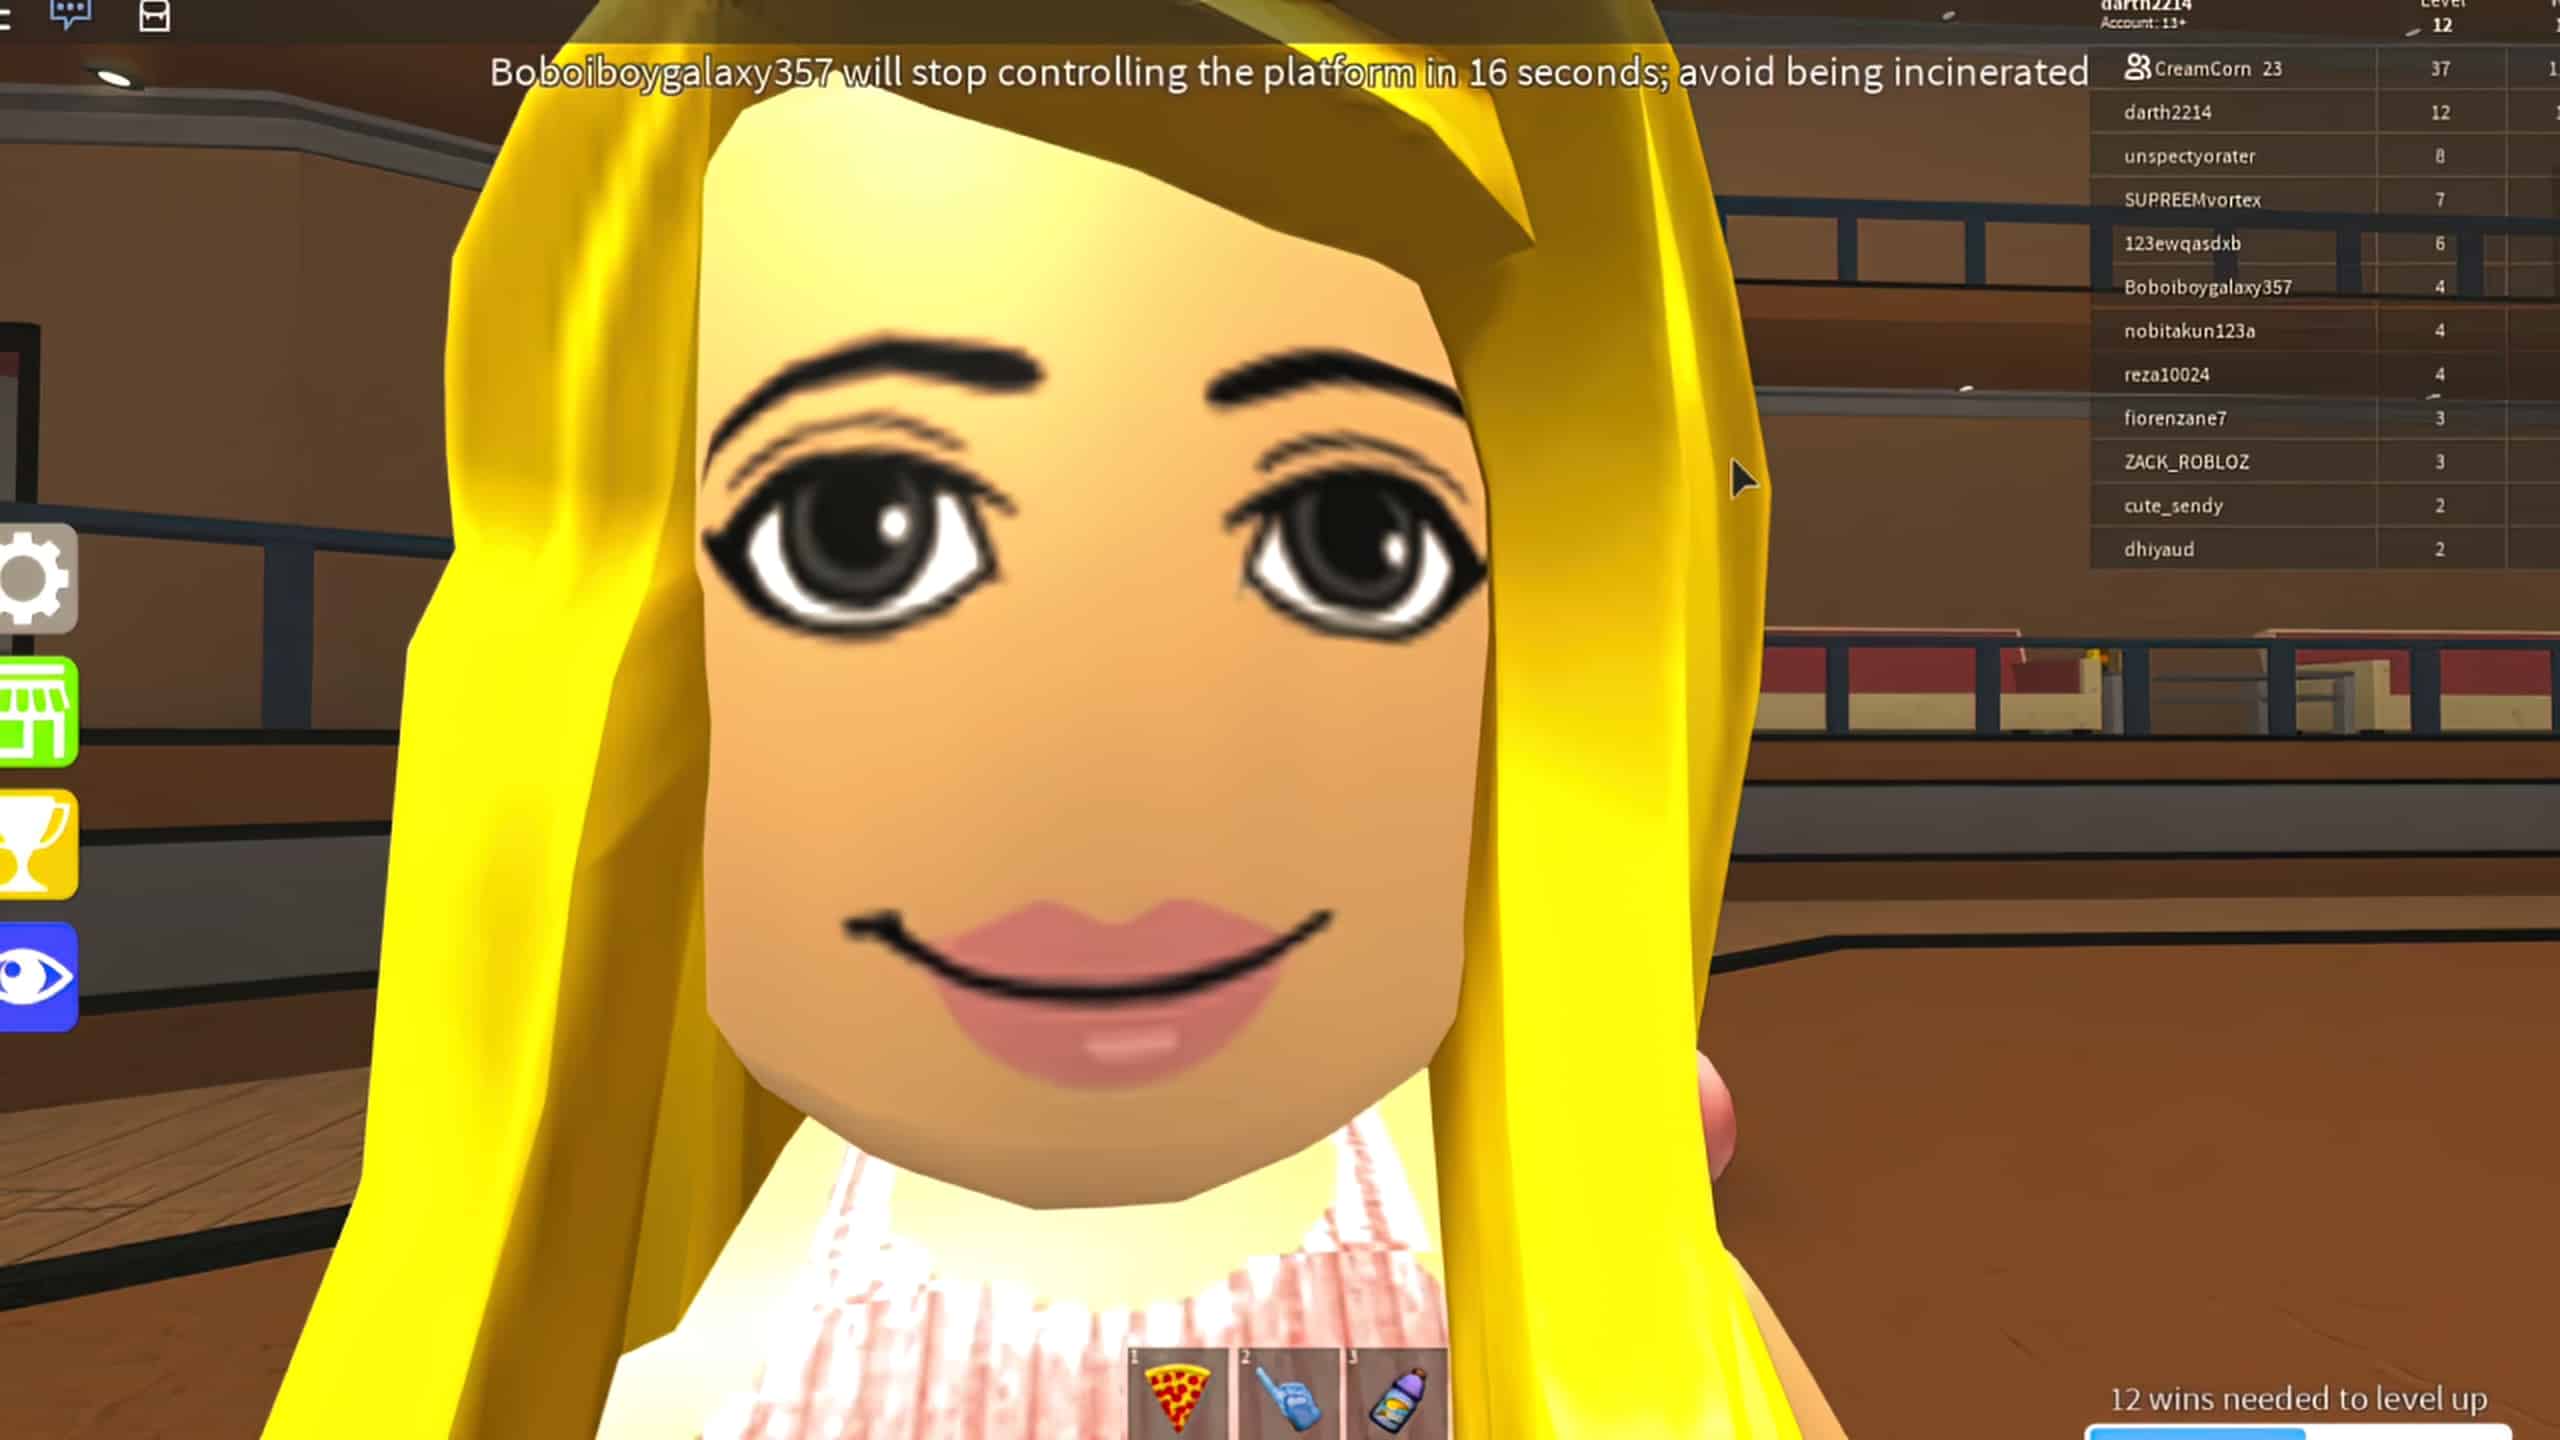 Roblox face woman😂😂  Roblox funny, Really funny pictures, Crazy